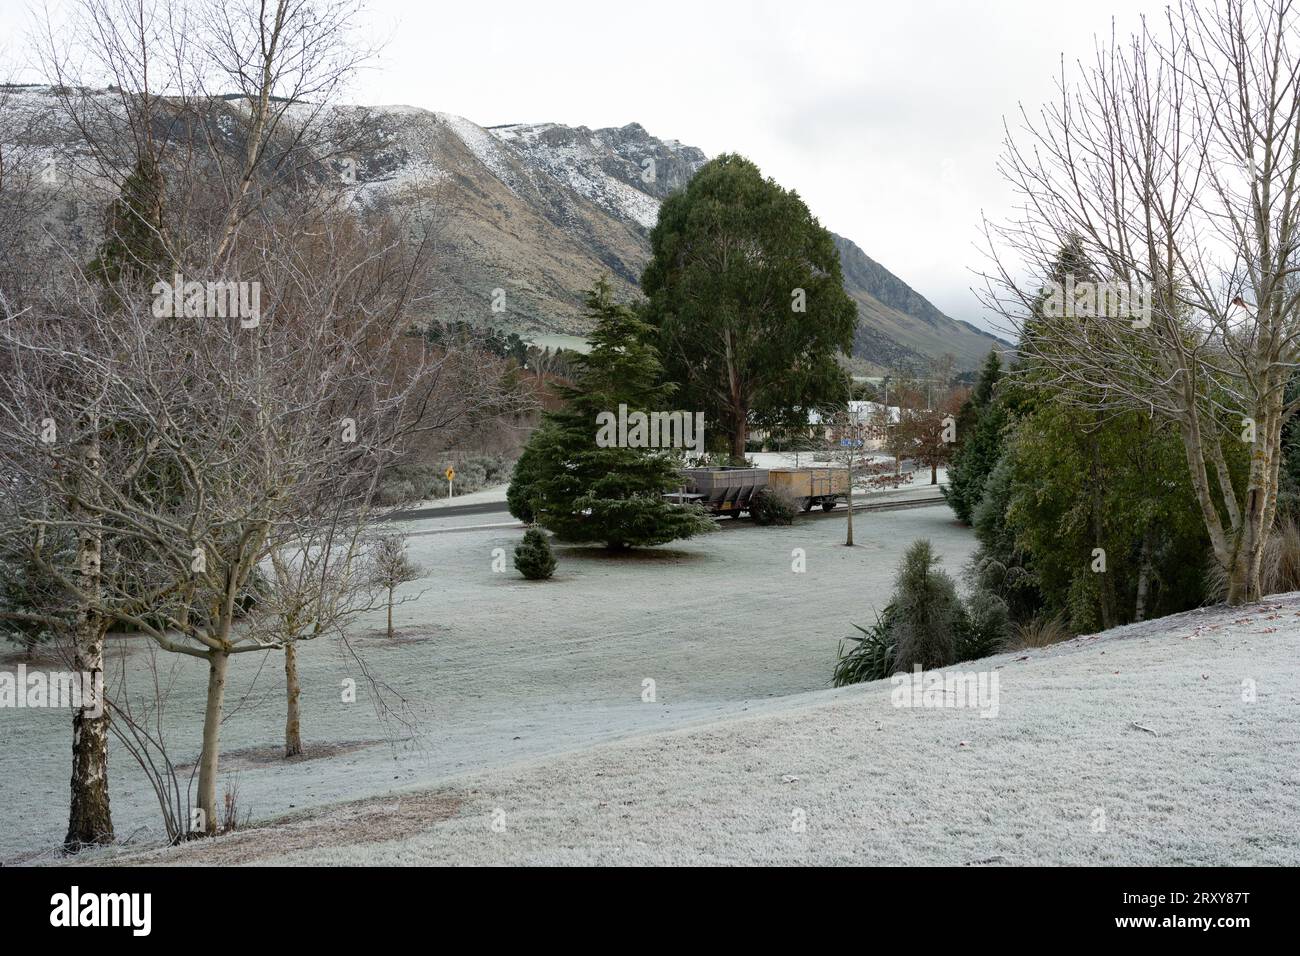 The town of Garston in Central Otago, New Zealand Stock Photo